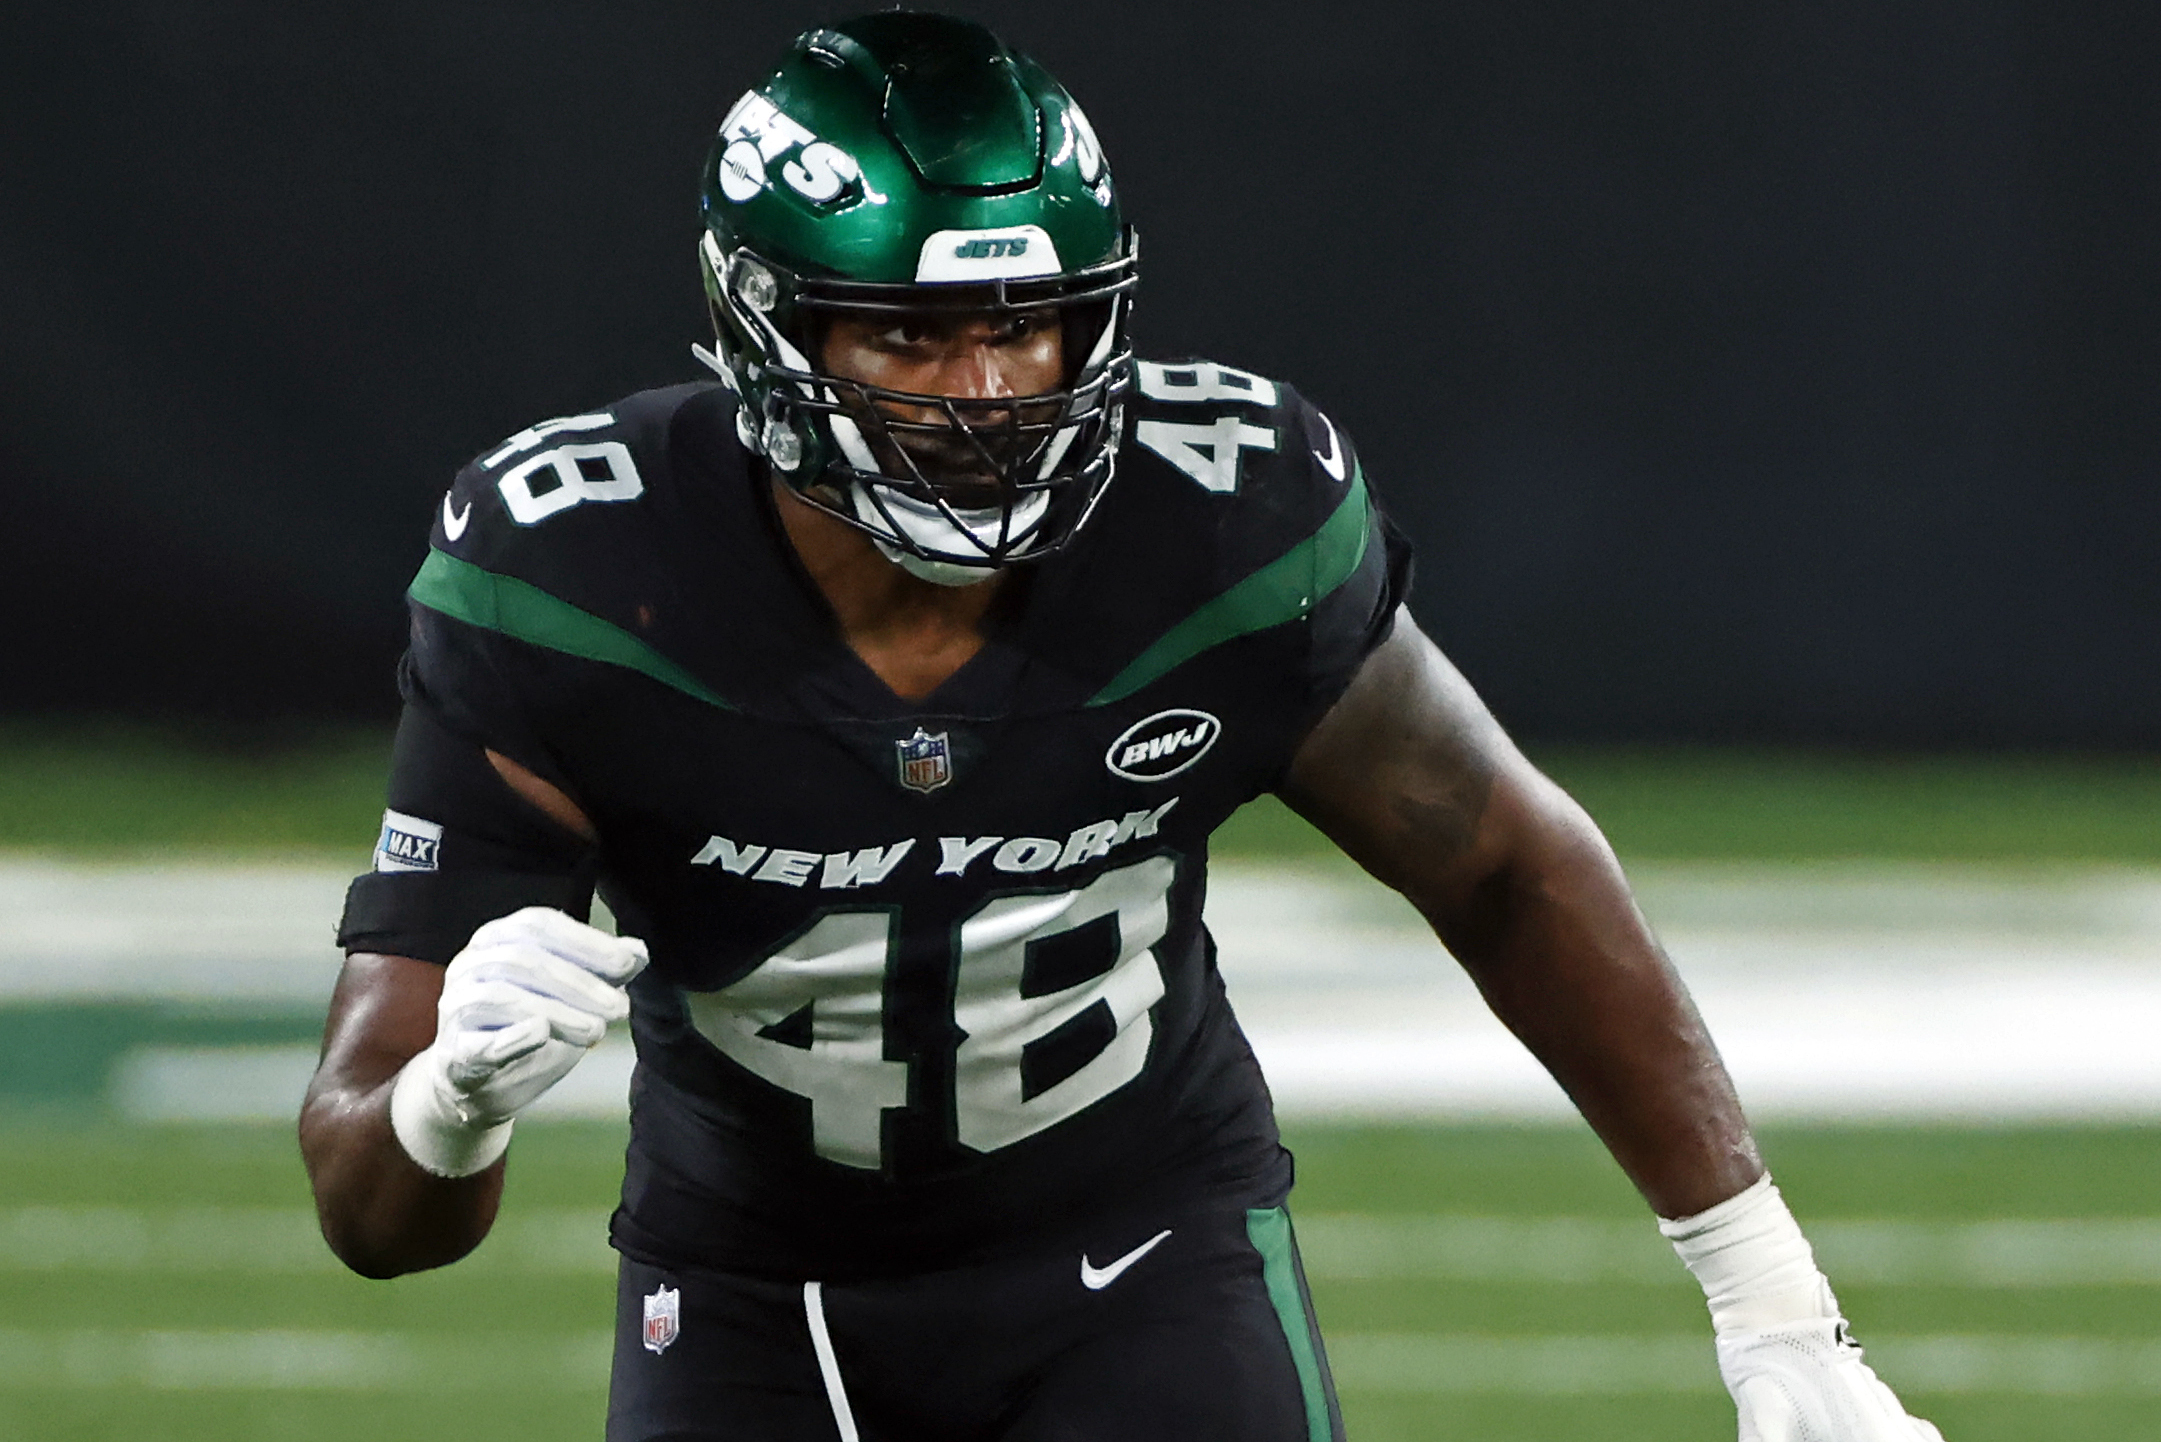 LB Jordan Jenkins, Reportedly to 2-Year, $6M Contract | Bleacher Report | Latest News, Videos and Highlights